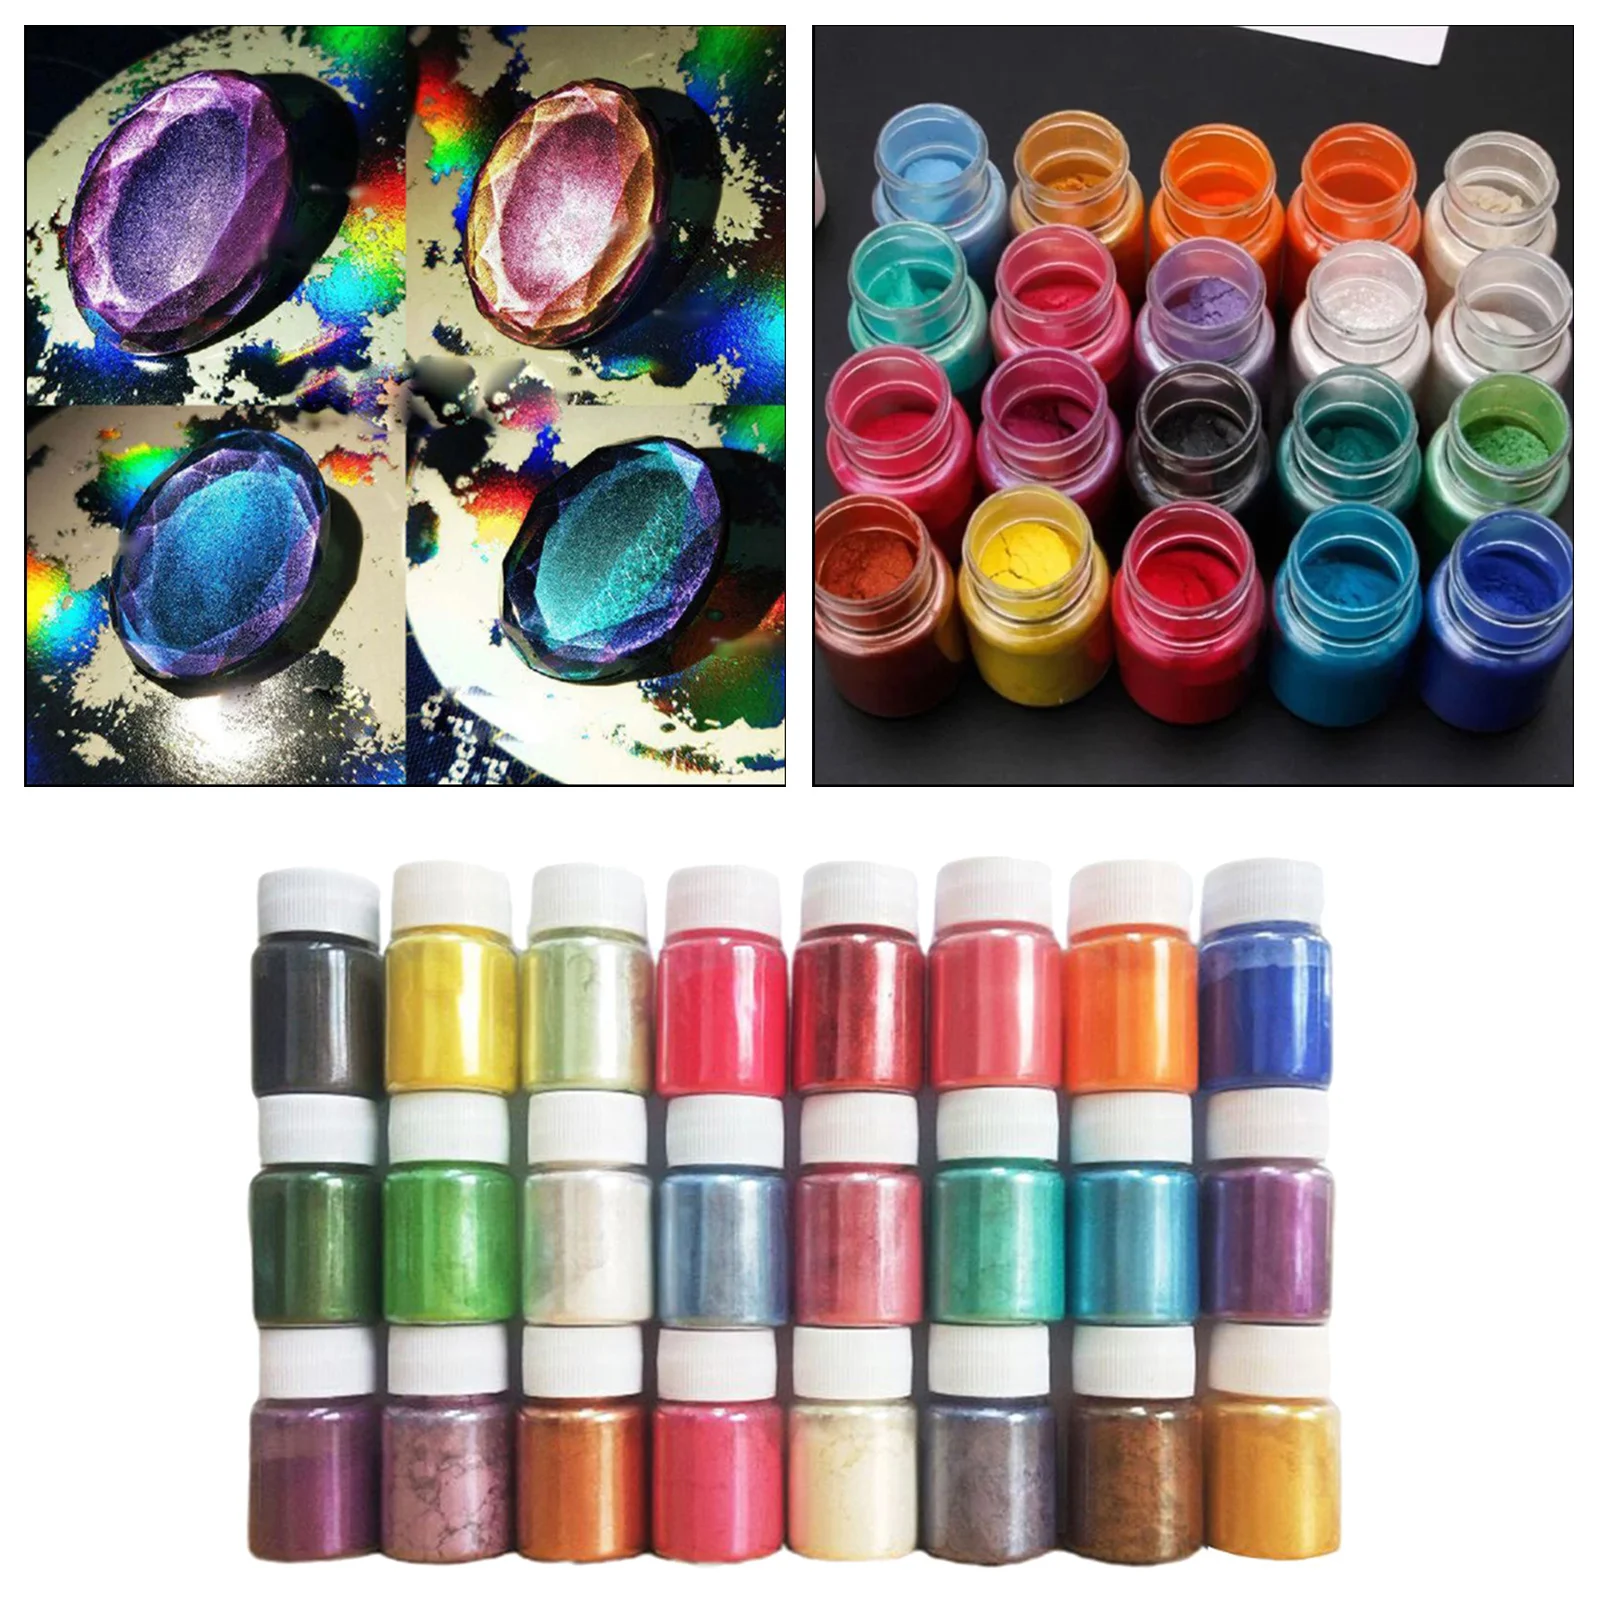 24 Colors Handmade Resin Epoxy Dye Pigment Mica Mineral Powder for jewelry Craft 